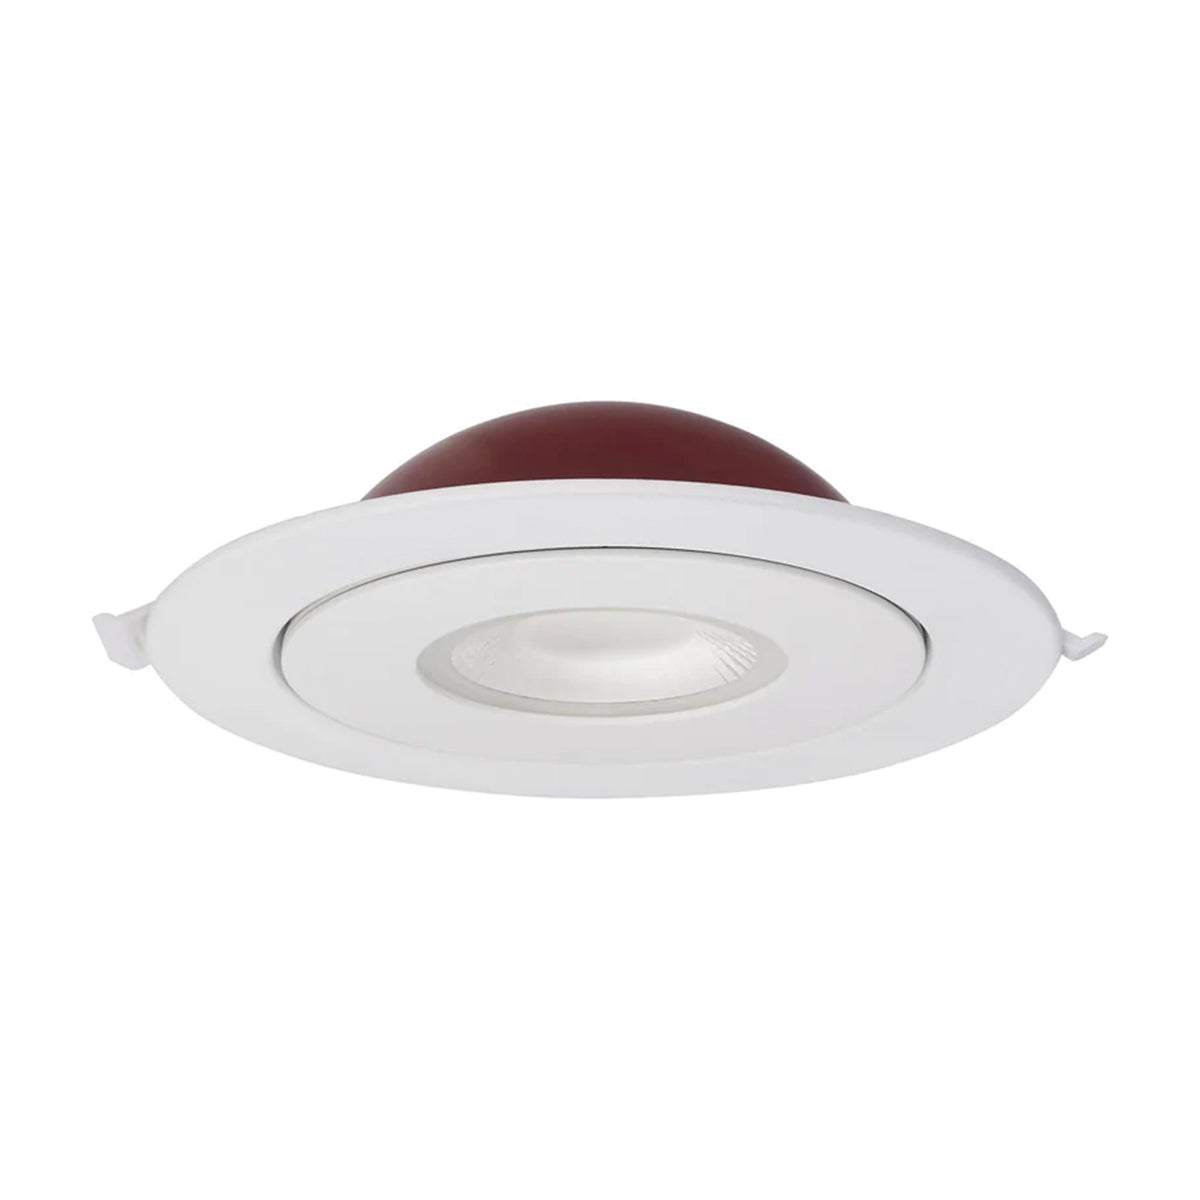 6 Inch Round LED Fire Rated Directional Downlight, 15 Watt, 1280 Lumens, Selectable CCT 2700K to 5000K, Adjustable Trim, White Finish